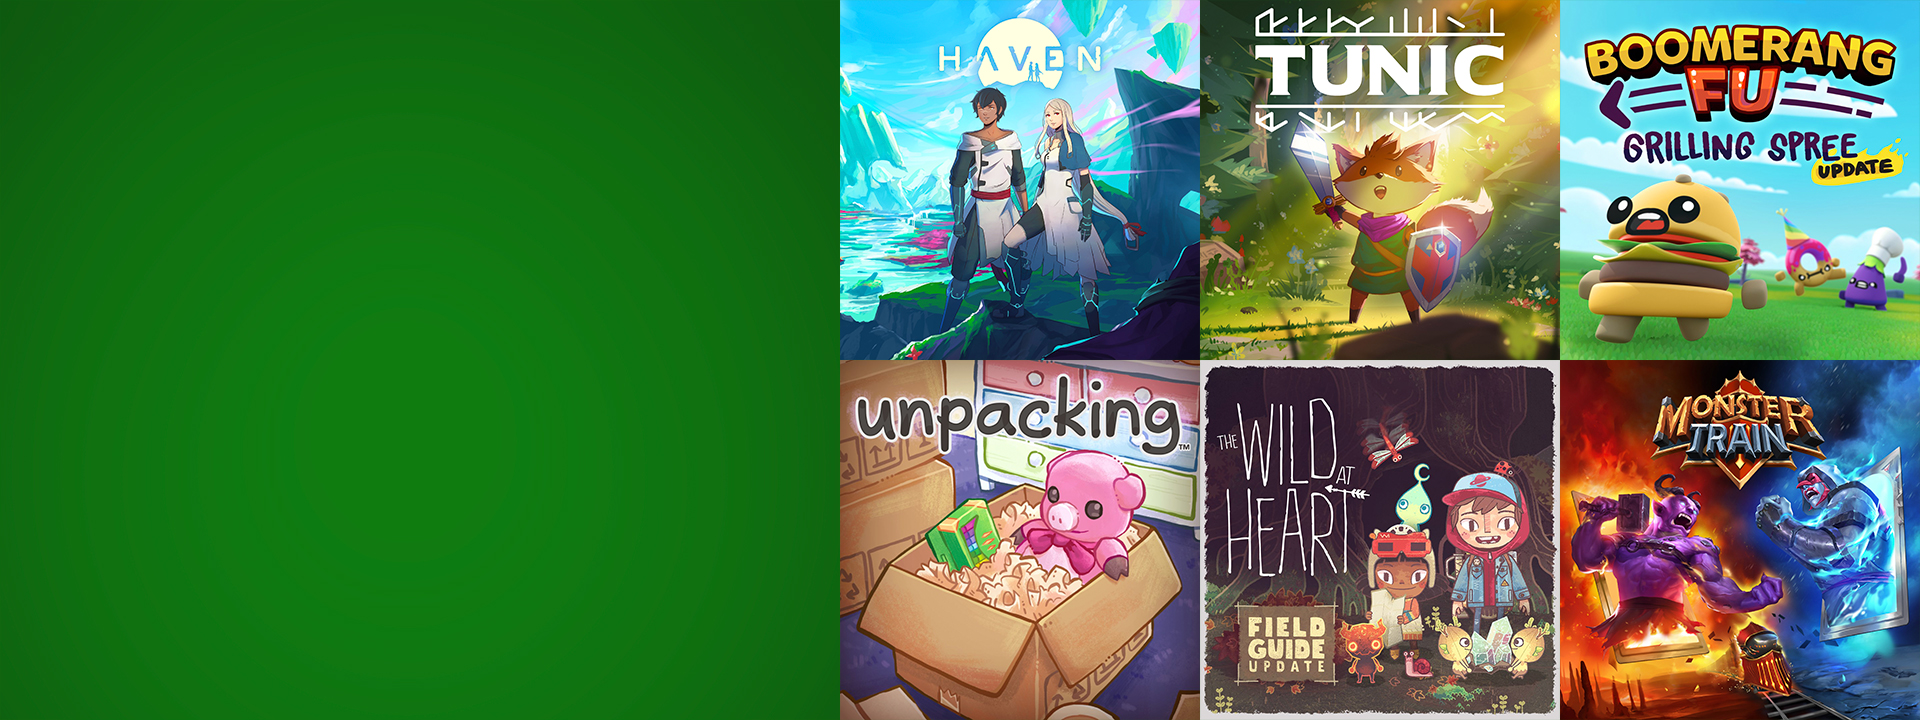 Haven, Tunic, Boomerang Fu, Unpacking, The Wild At Heart, and Monster Train, against a plain green background.